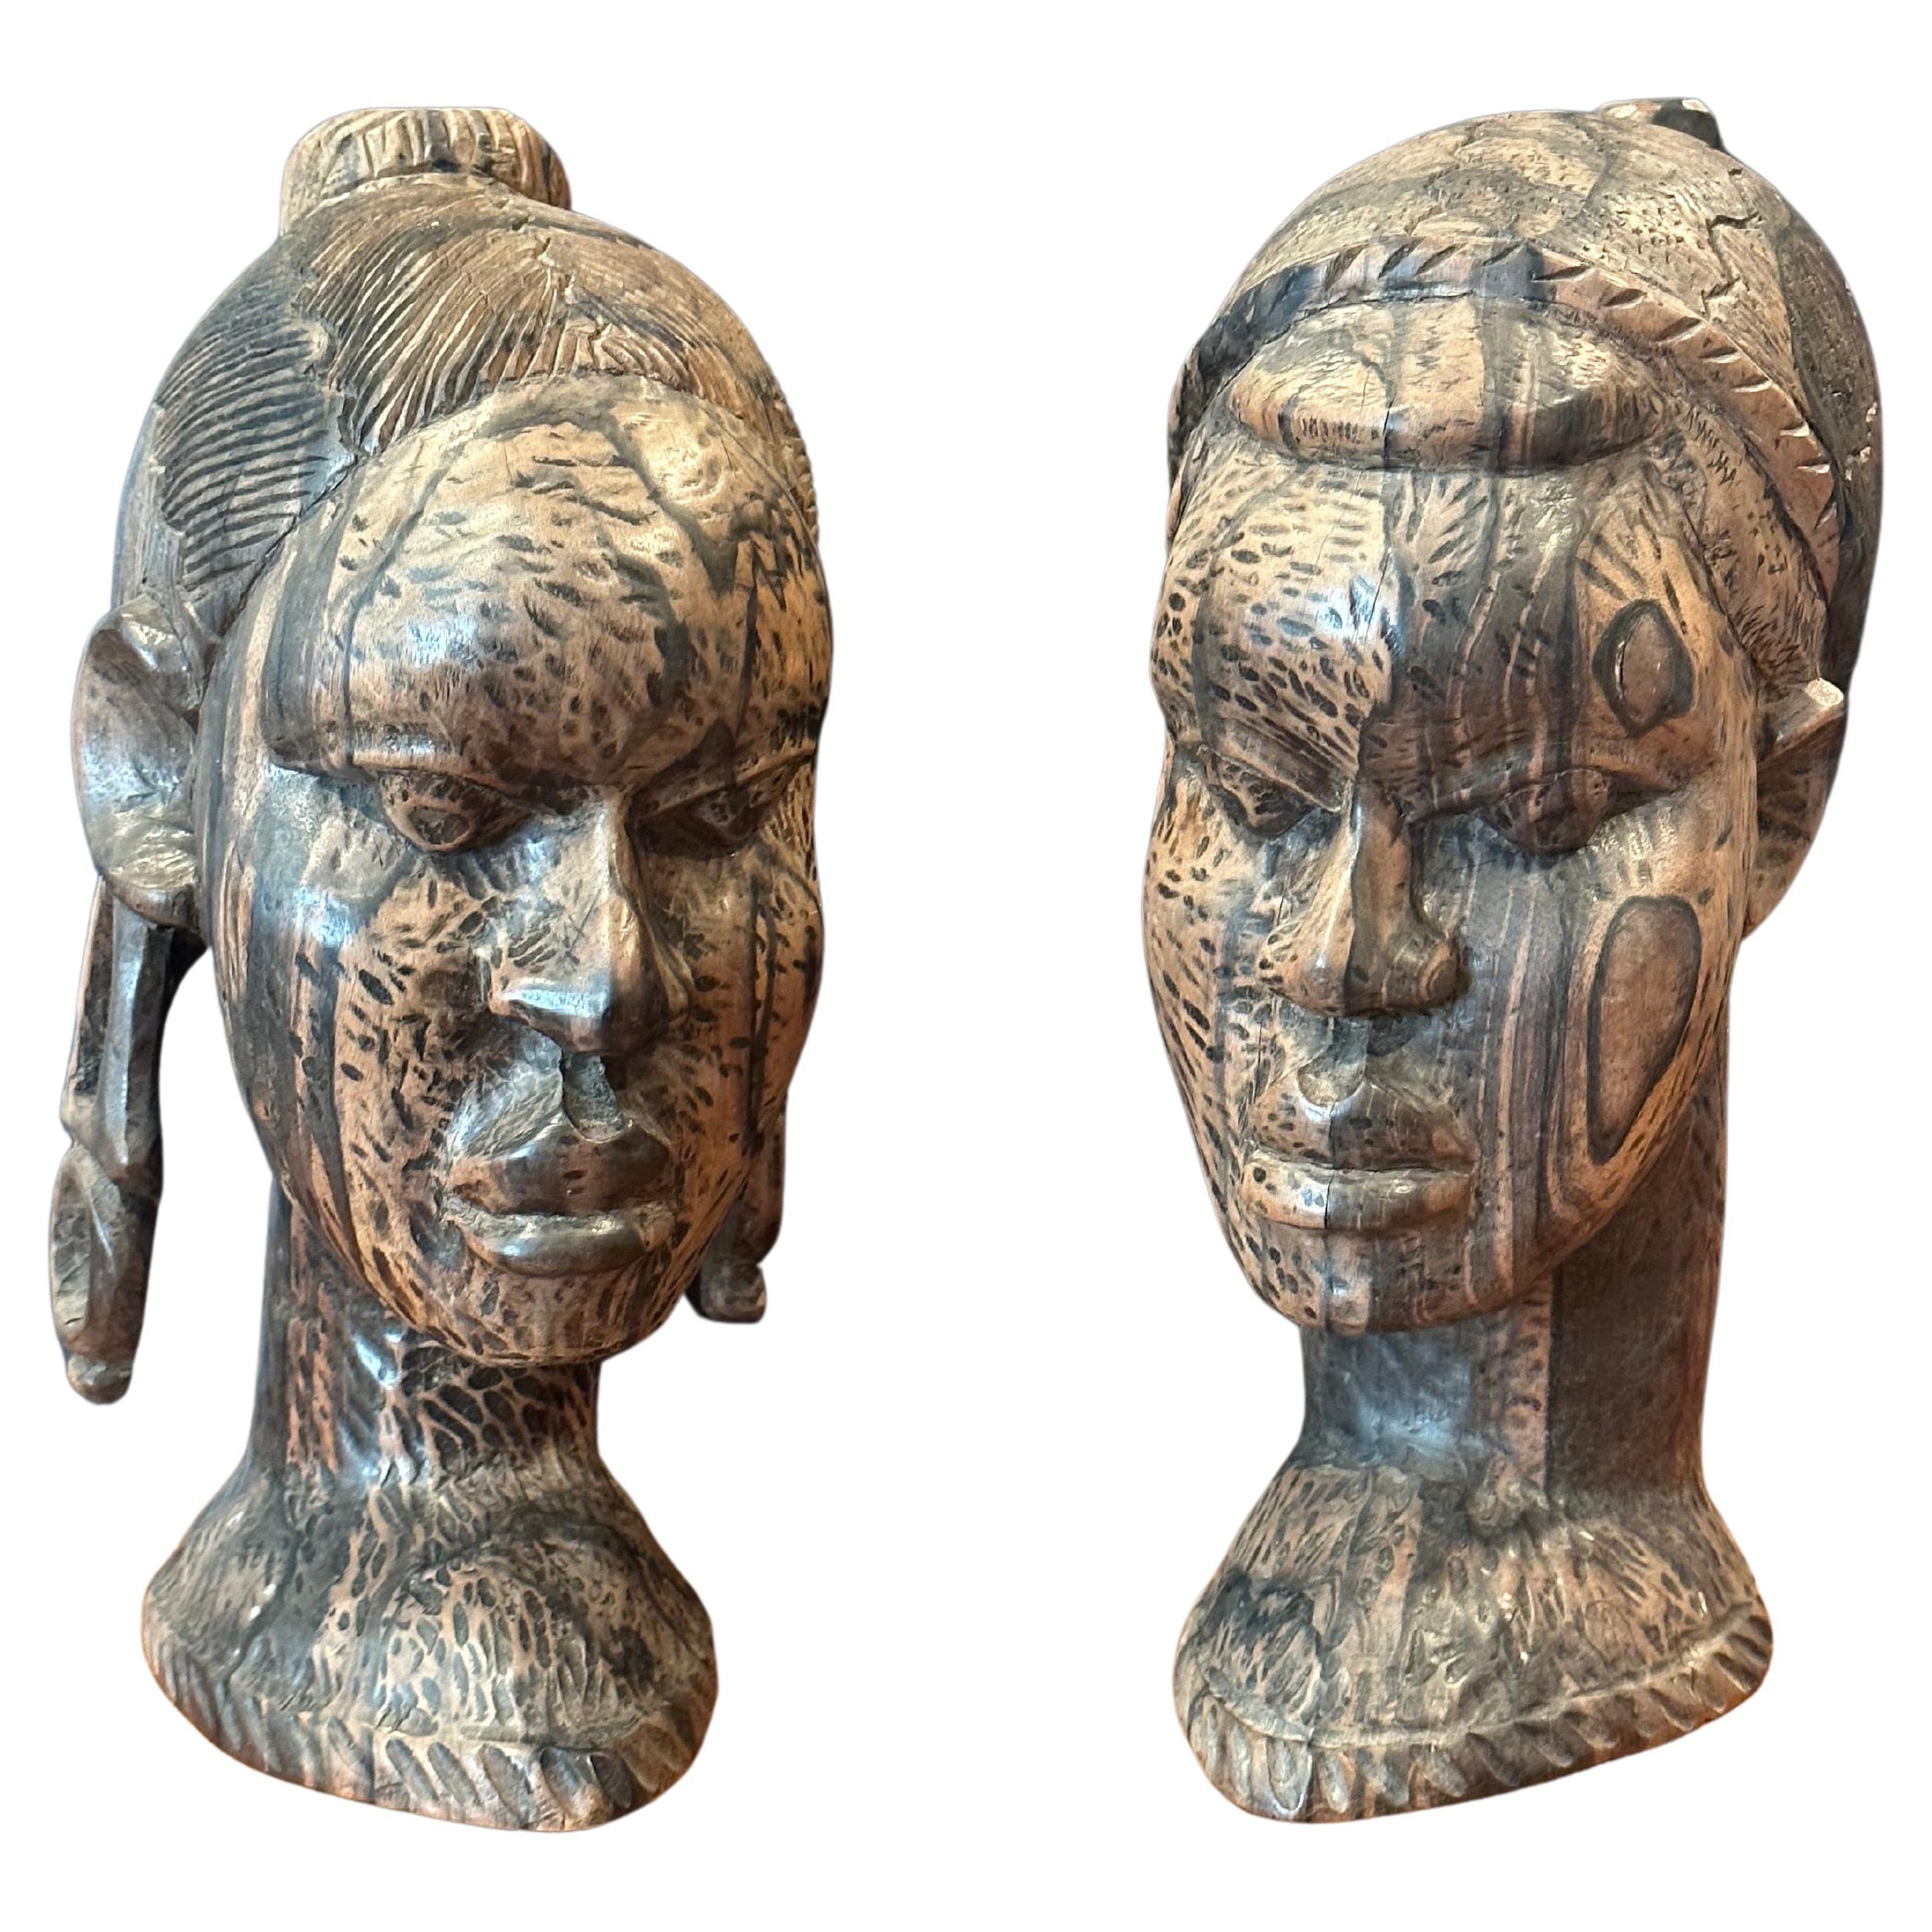 An impressive pair of hand-carved hardwood African busts, circa 1970s. The pair are made out of some type of exotic hardwood (zebra wood? very heavy and dense) and have an amazing look.  Each bust is in very good condition with no chips and measures